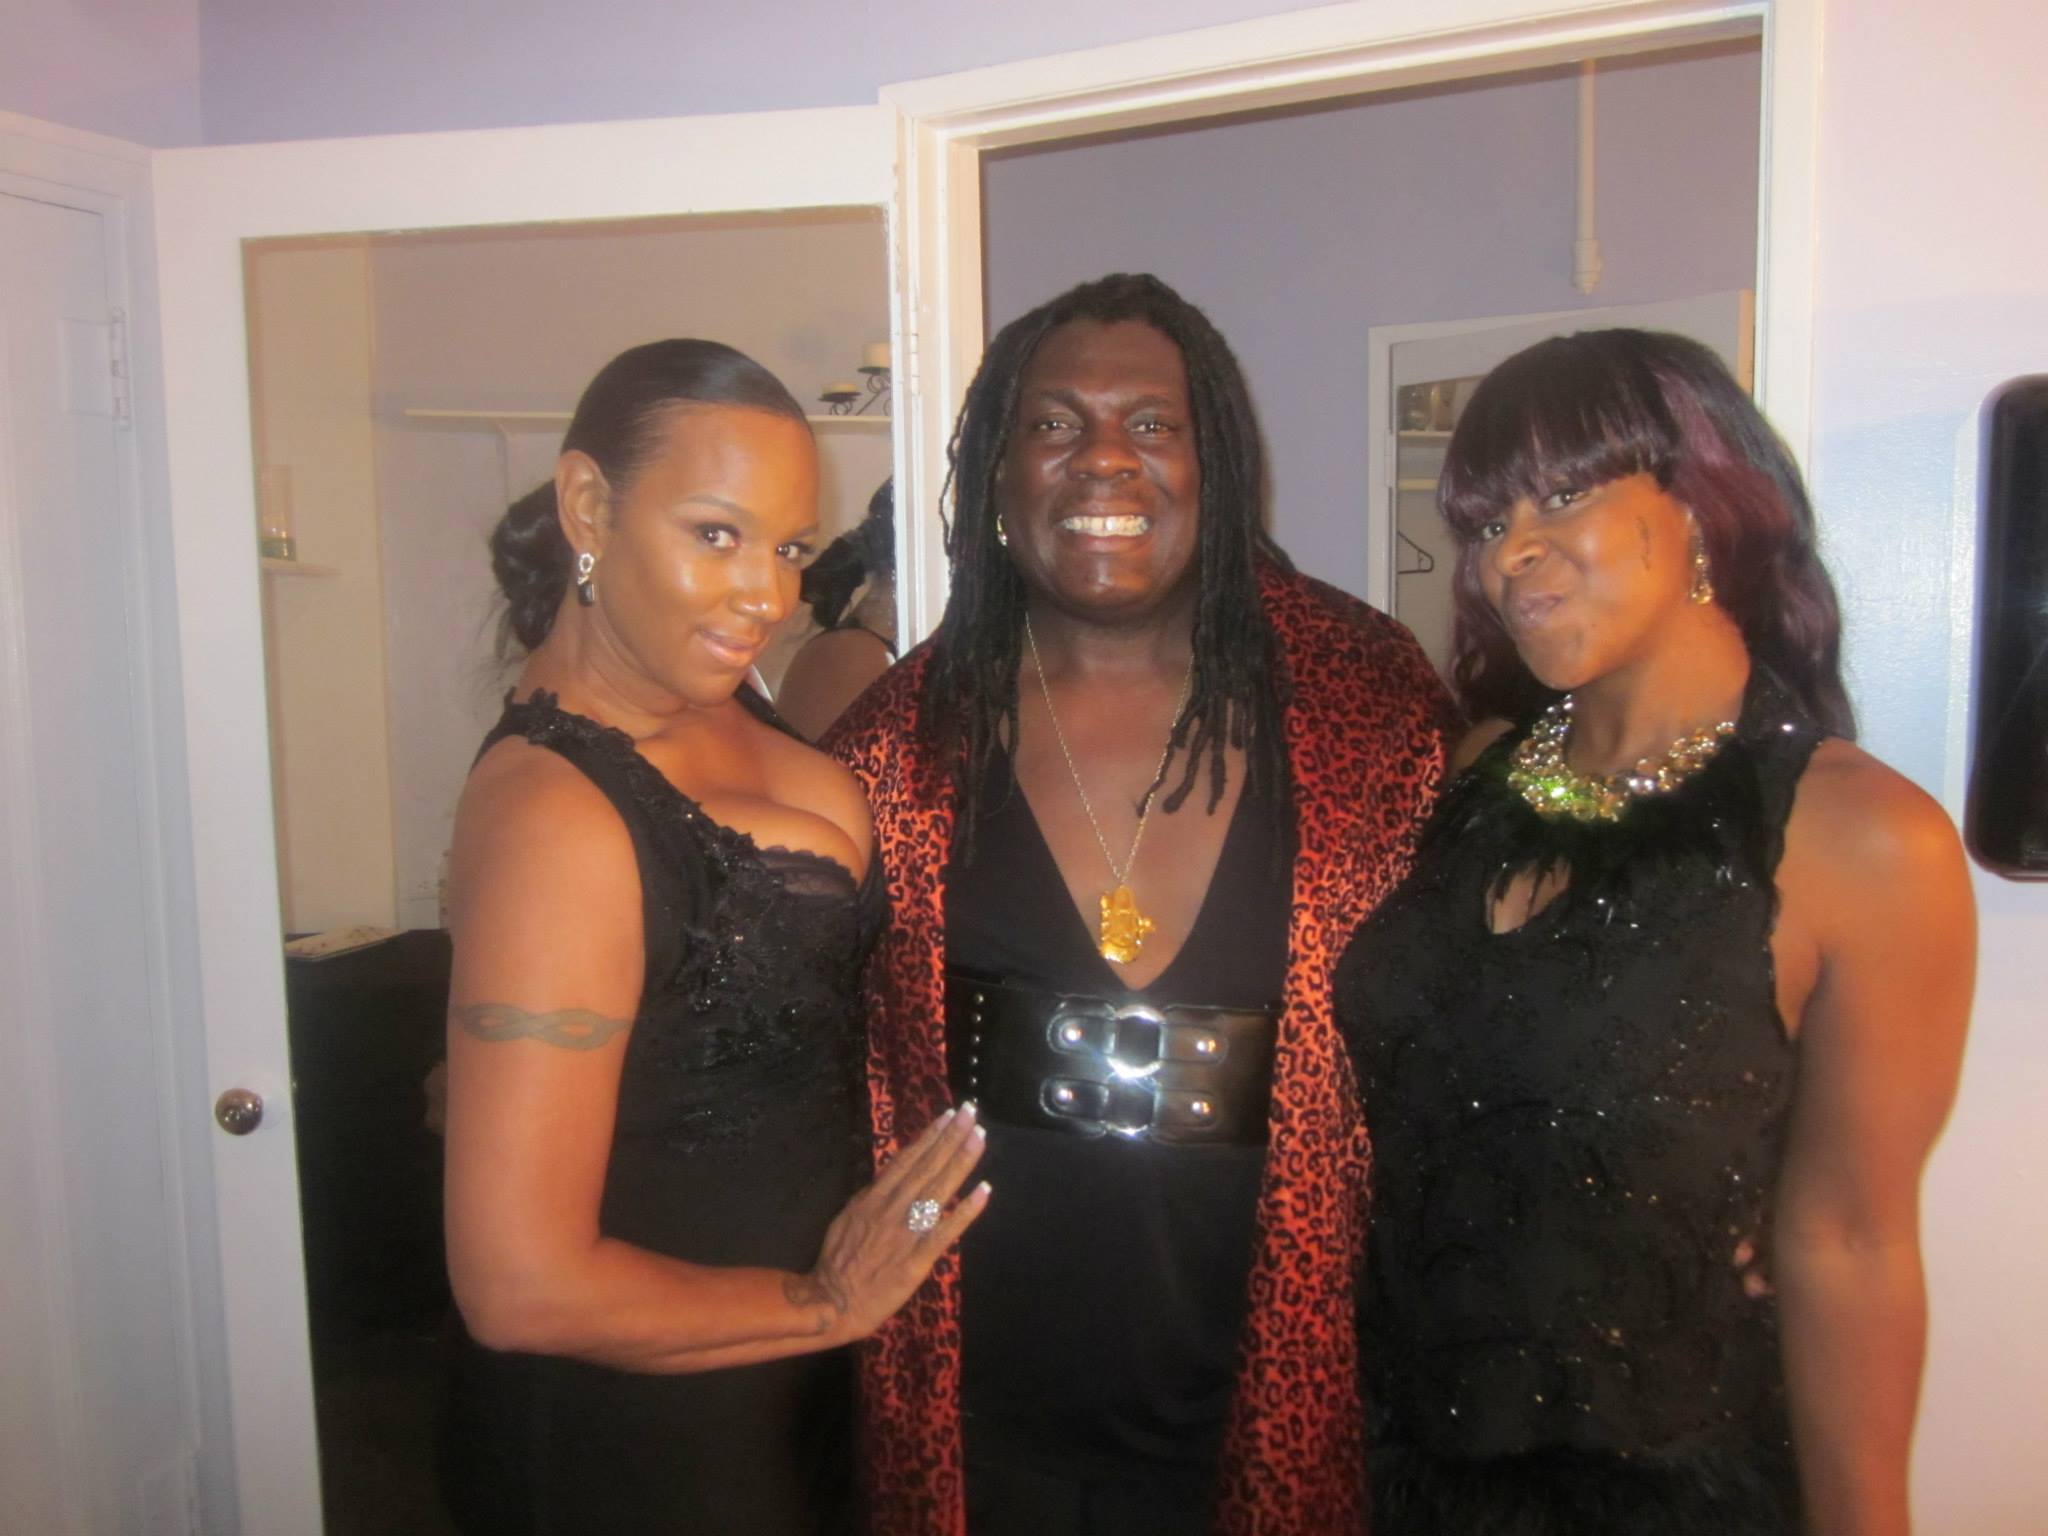 Tony Davis, Jackie Christie, and Sphynix Rose at The African Oscars 2014